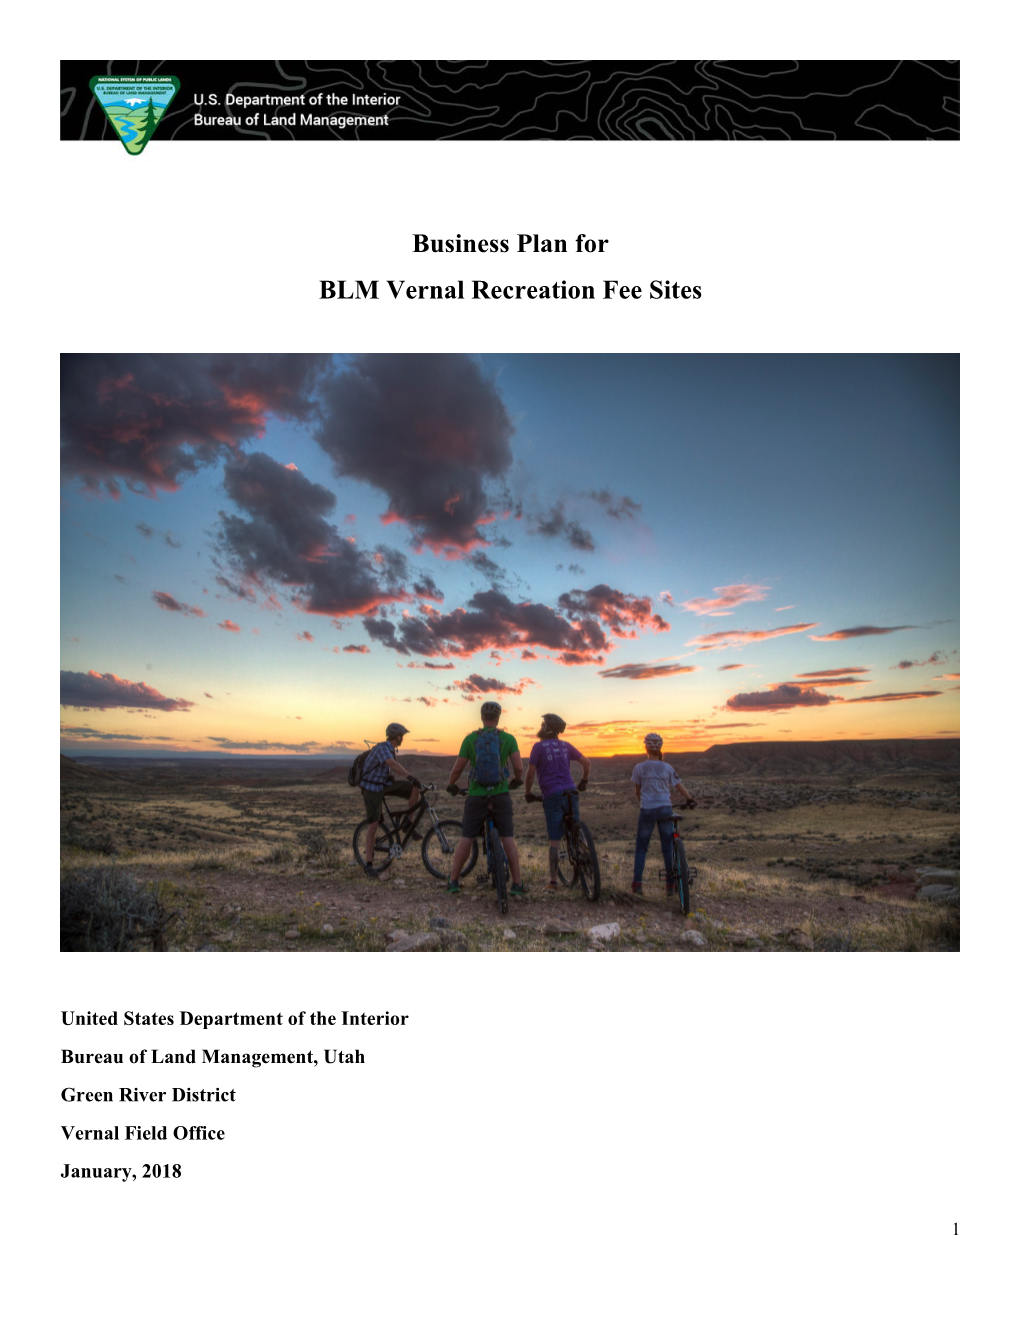 Business Plan for BLM Vernal Recreation Fee Sites